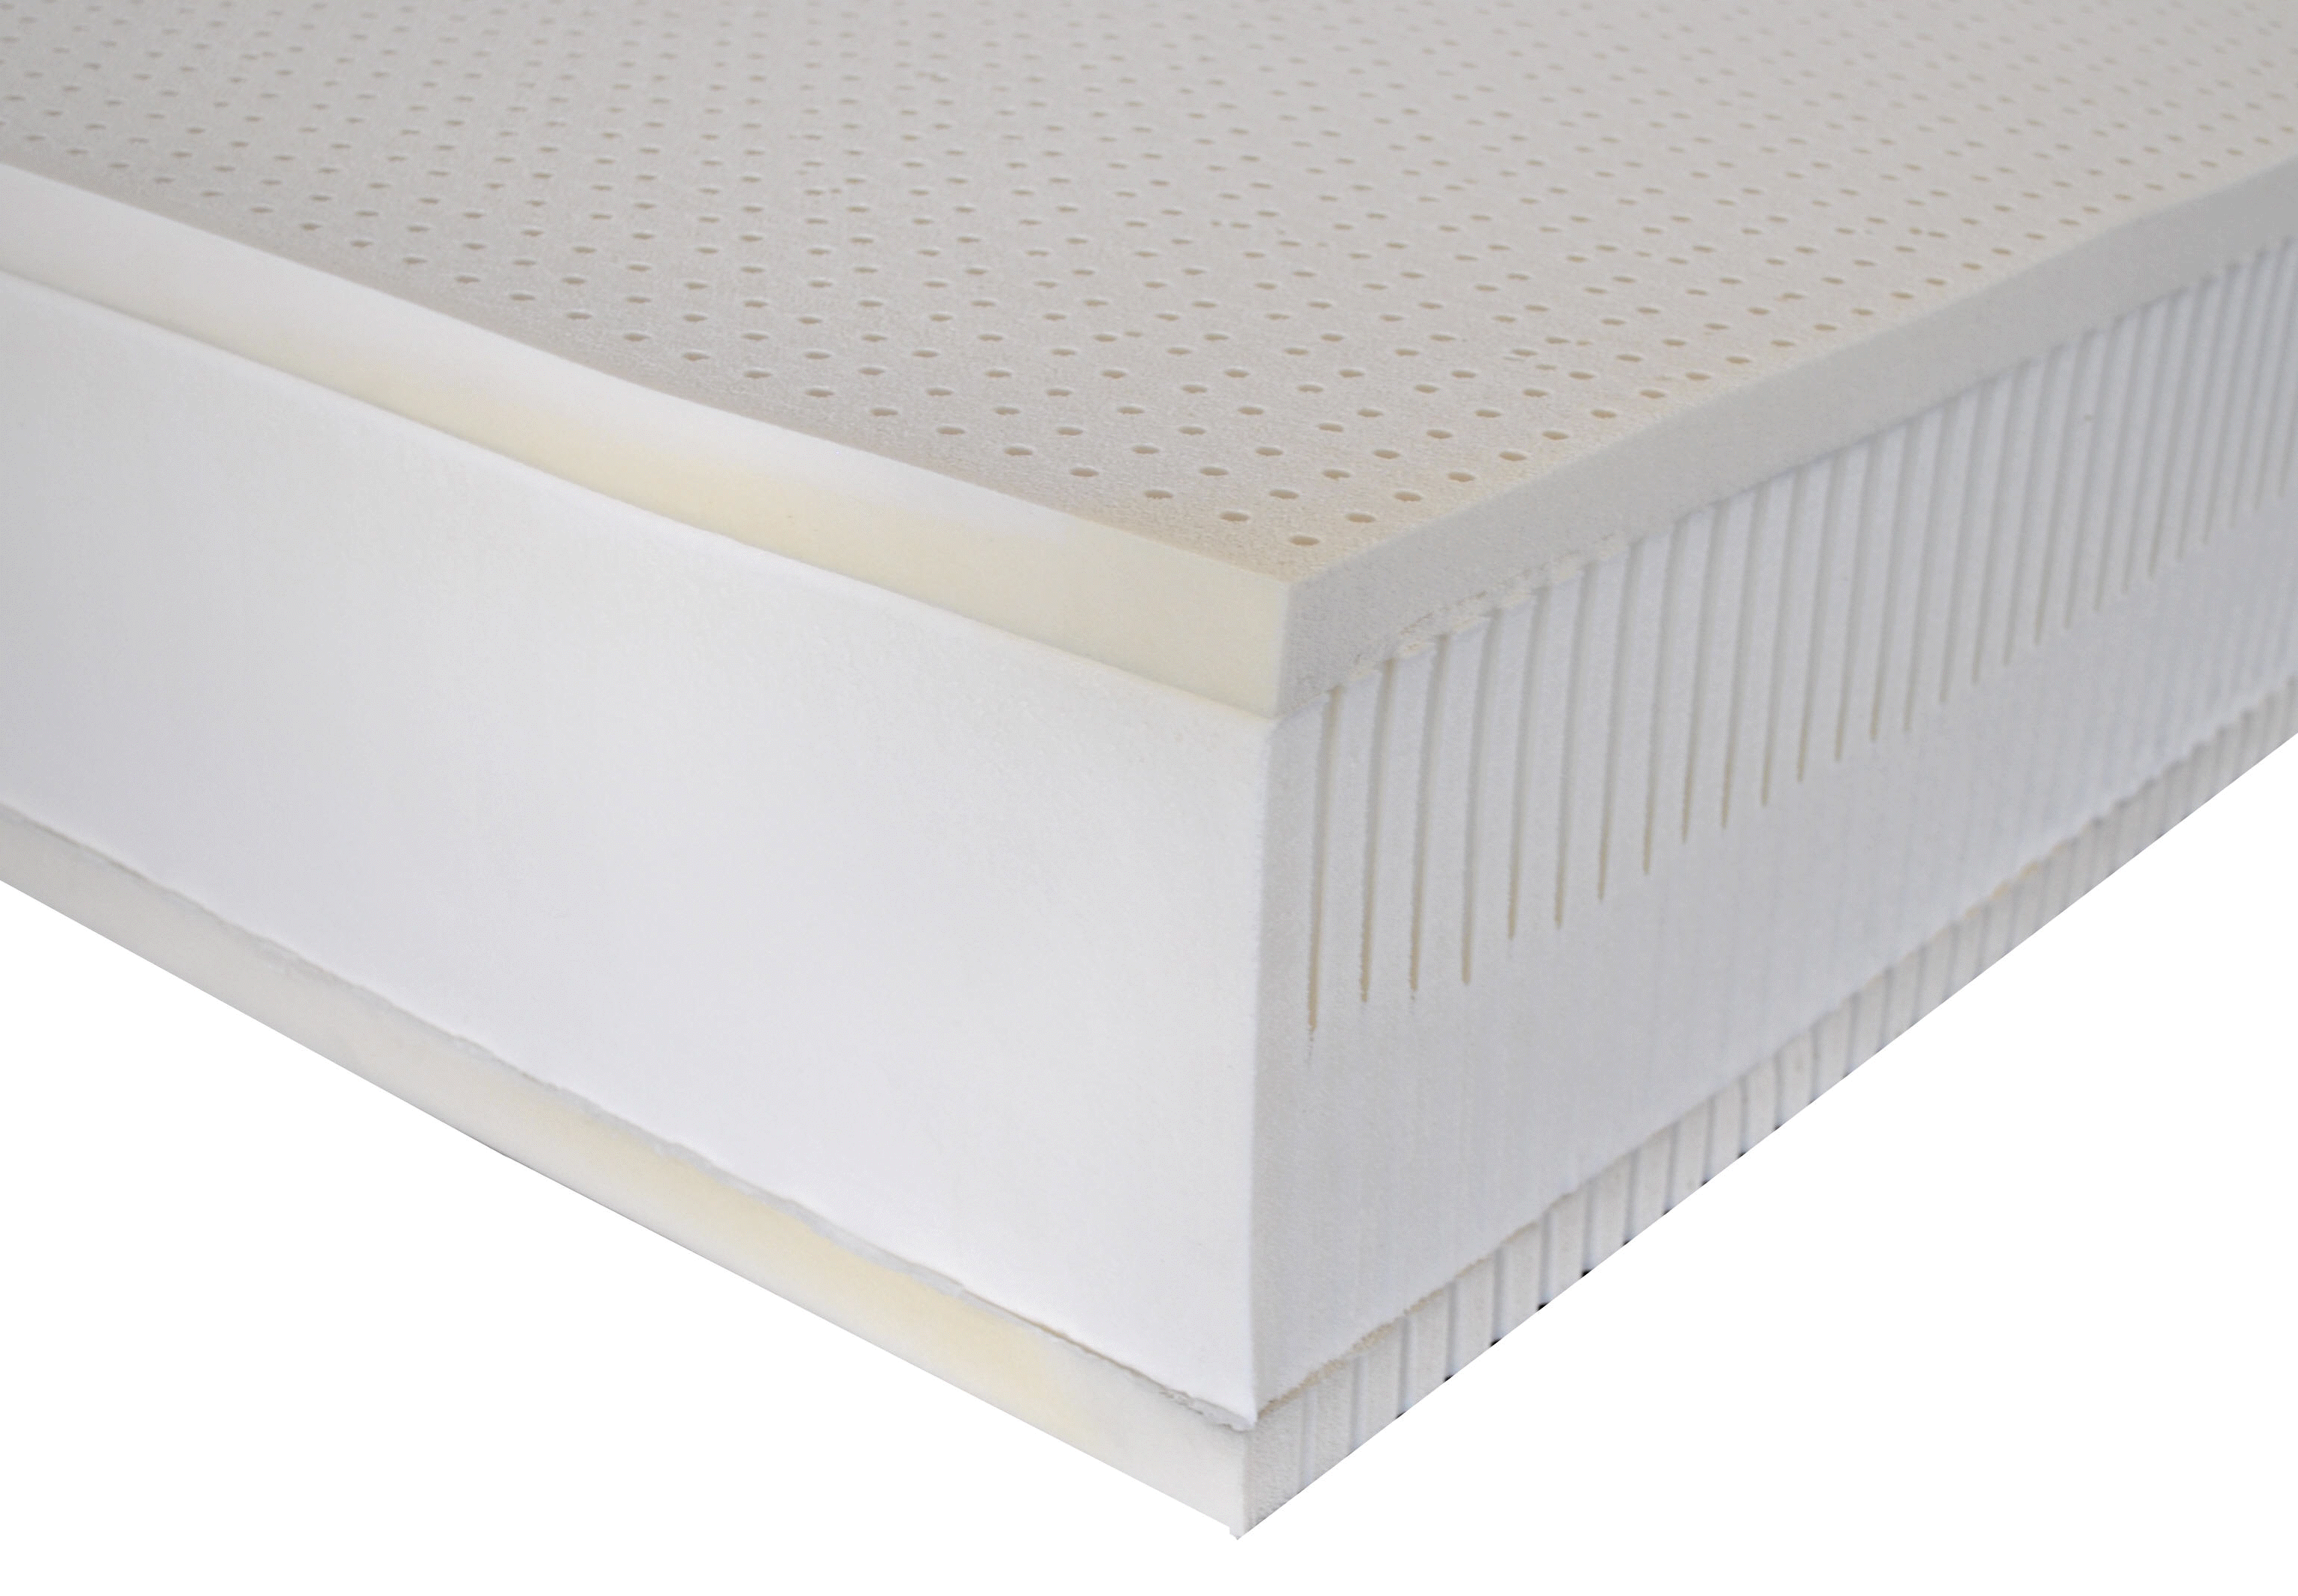 best quality highest rated prices are for Latex electric adjustable bed TALALAY natural organic latex mattress